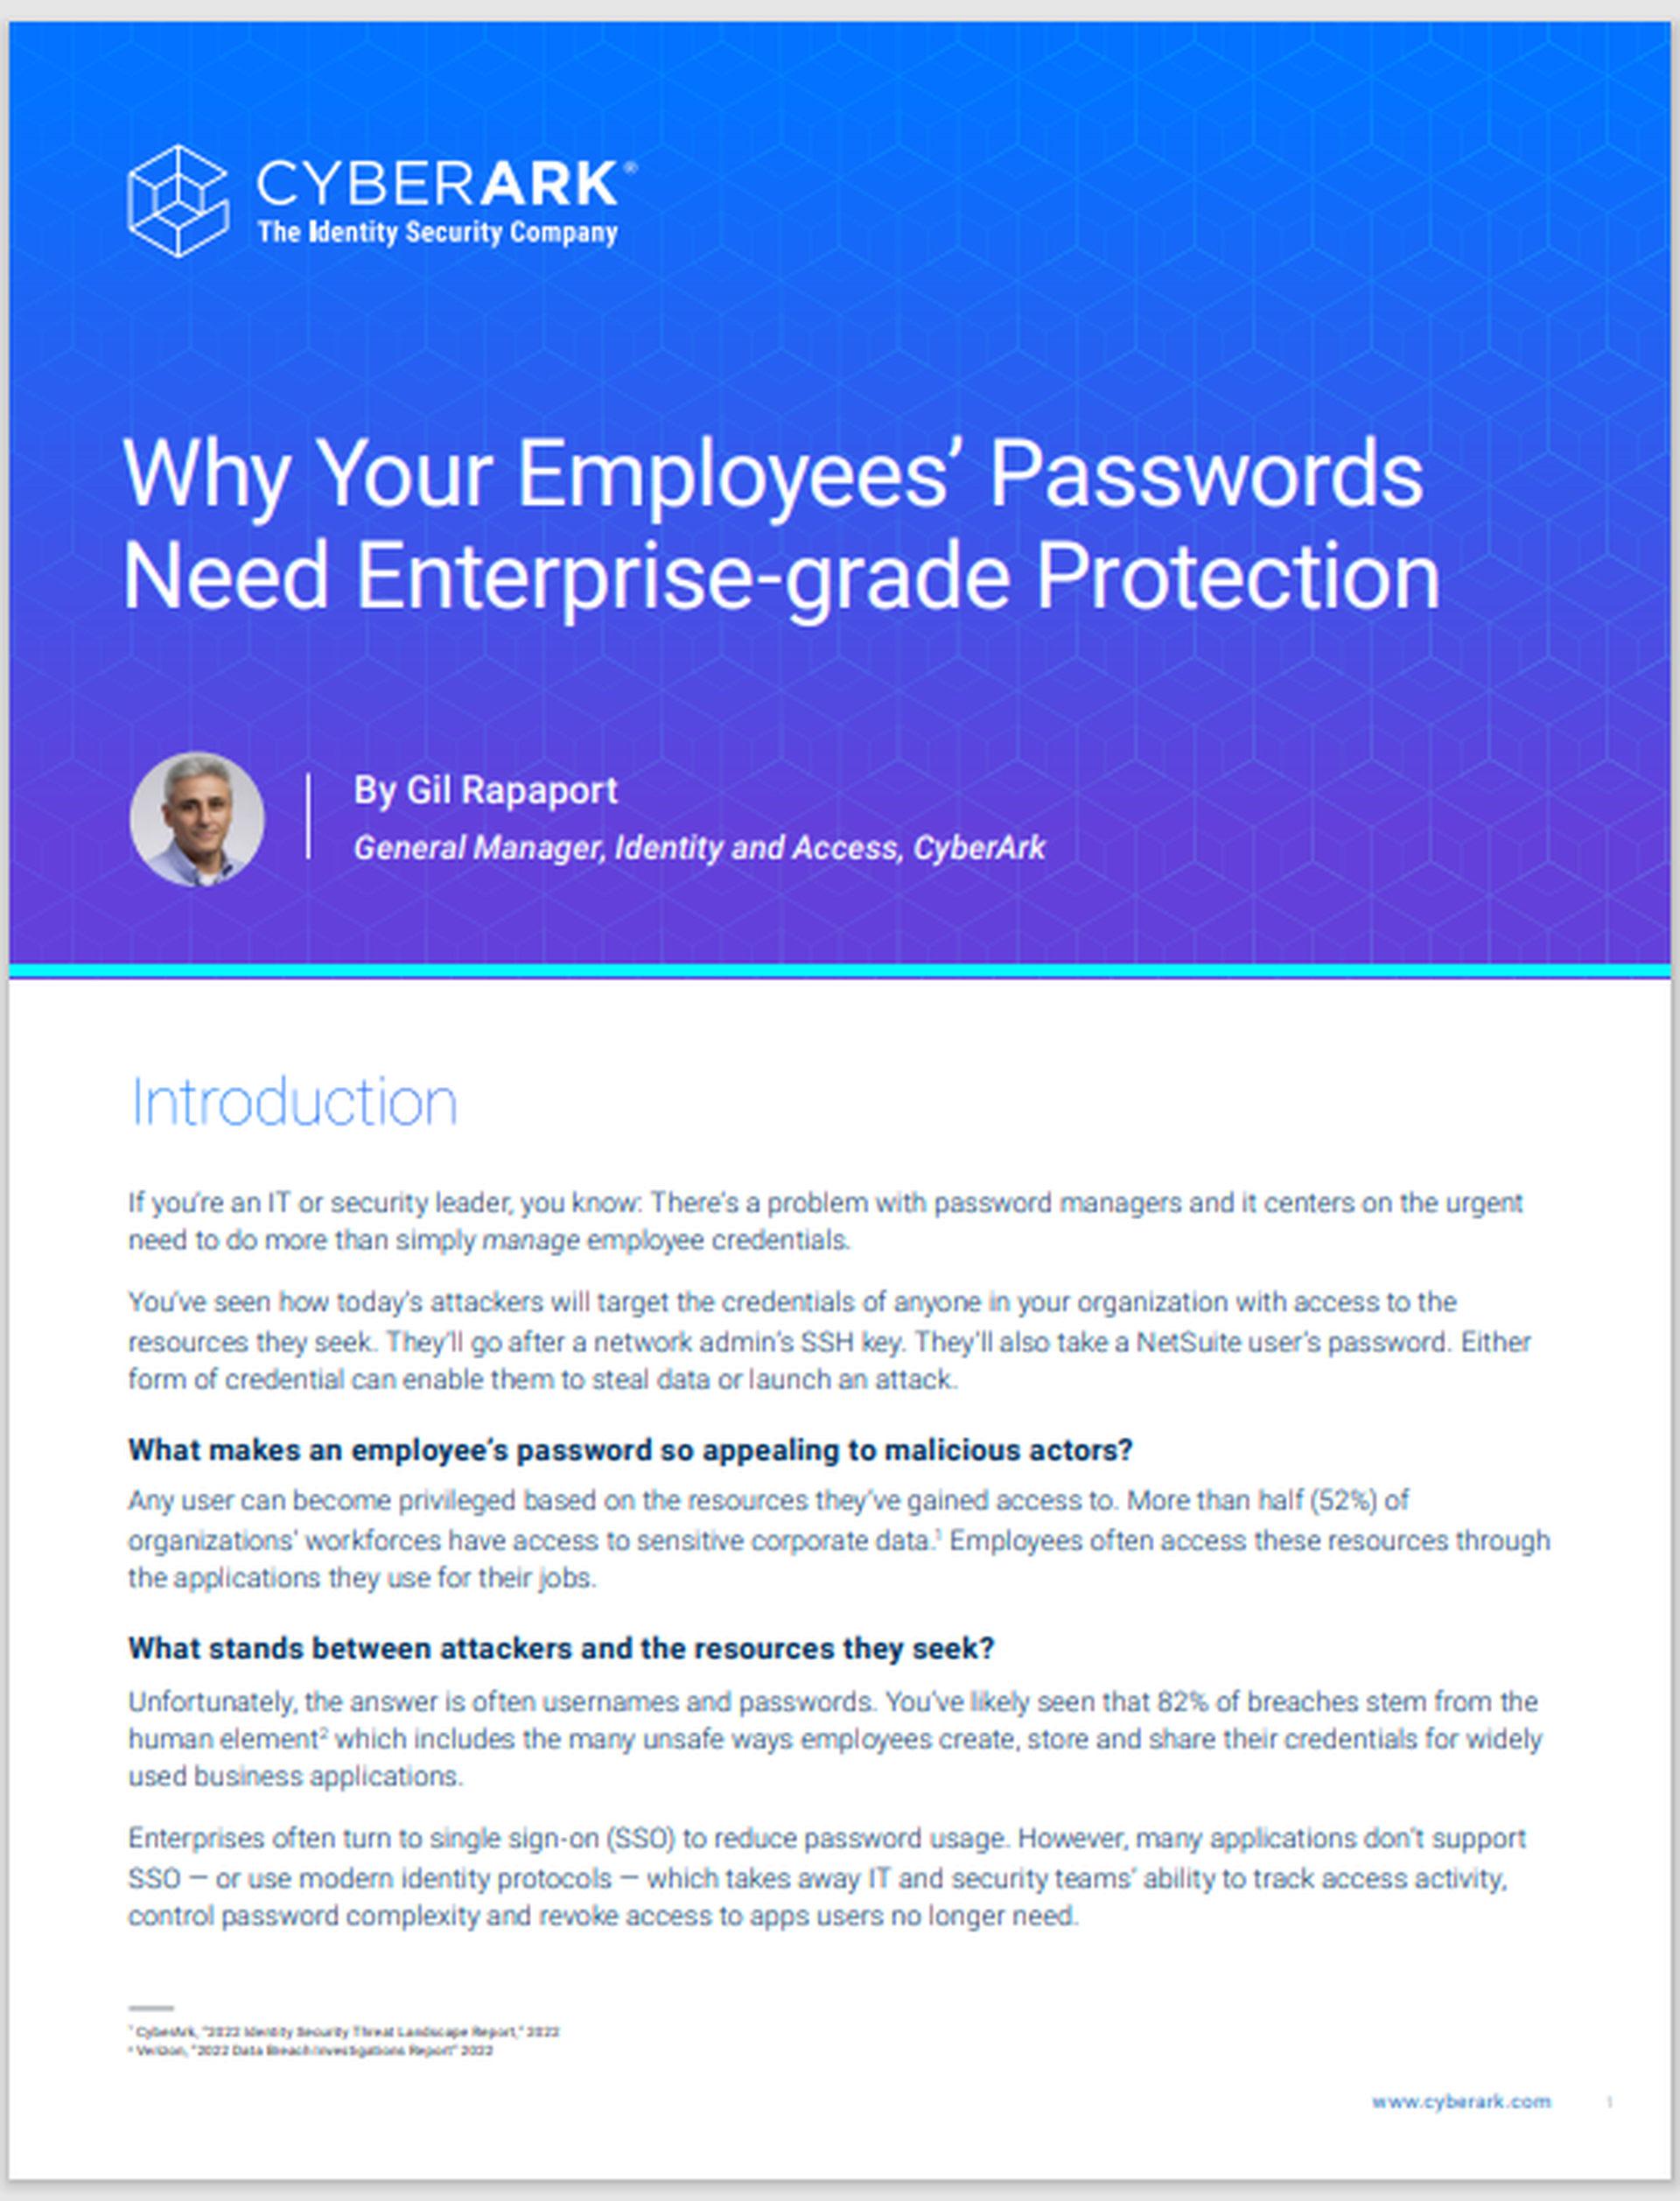 Why Your Employees’ Passwords Need Enterprise-grade Protection